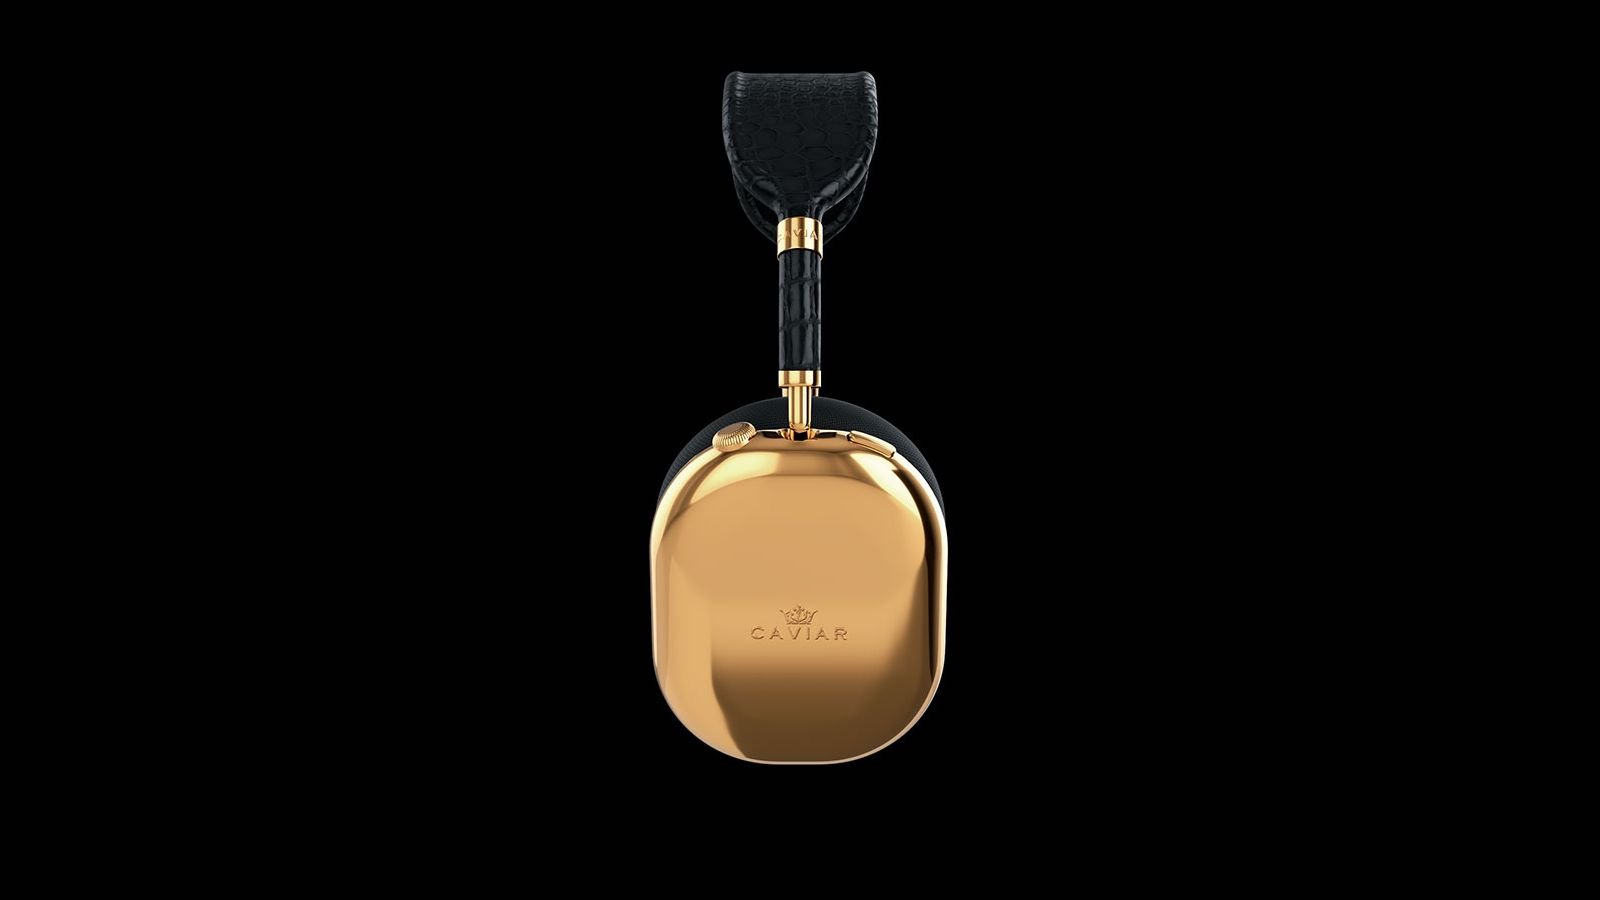 Caviar AirPods Max Gold Black features earcups made from 750 grams of pure gold